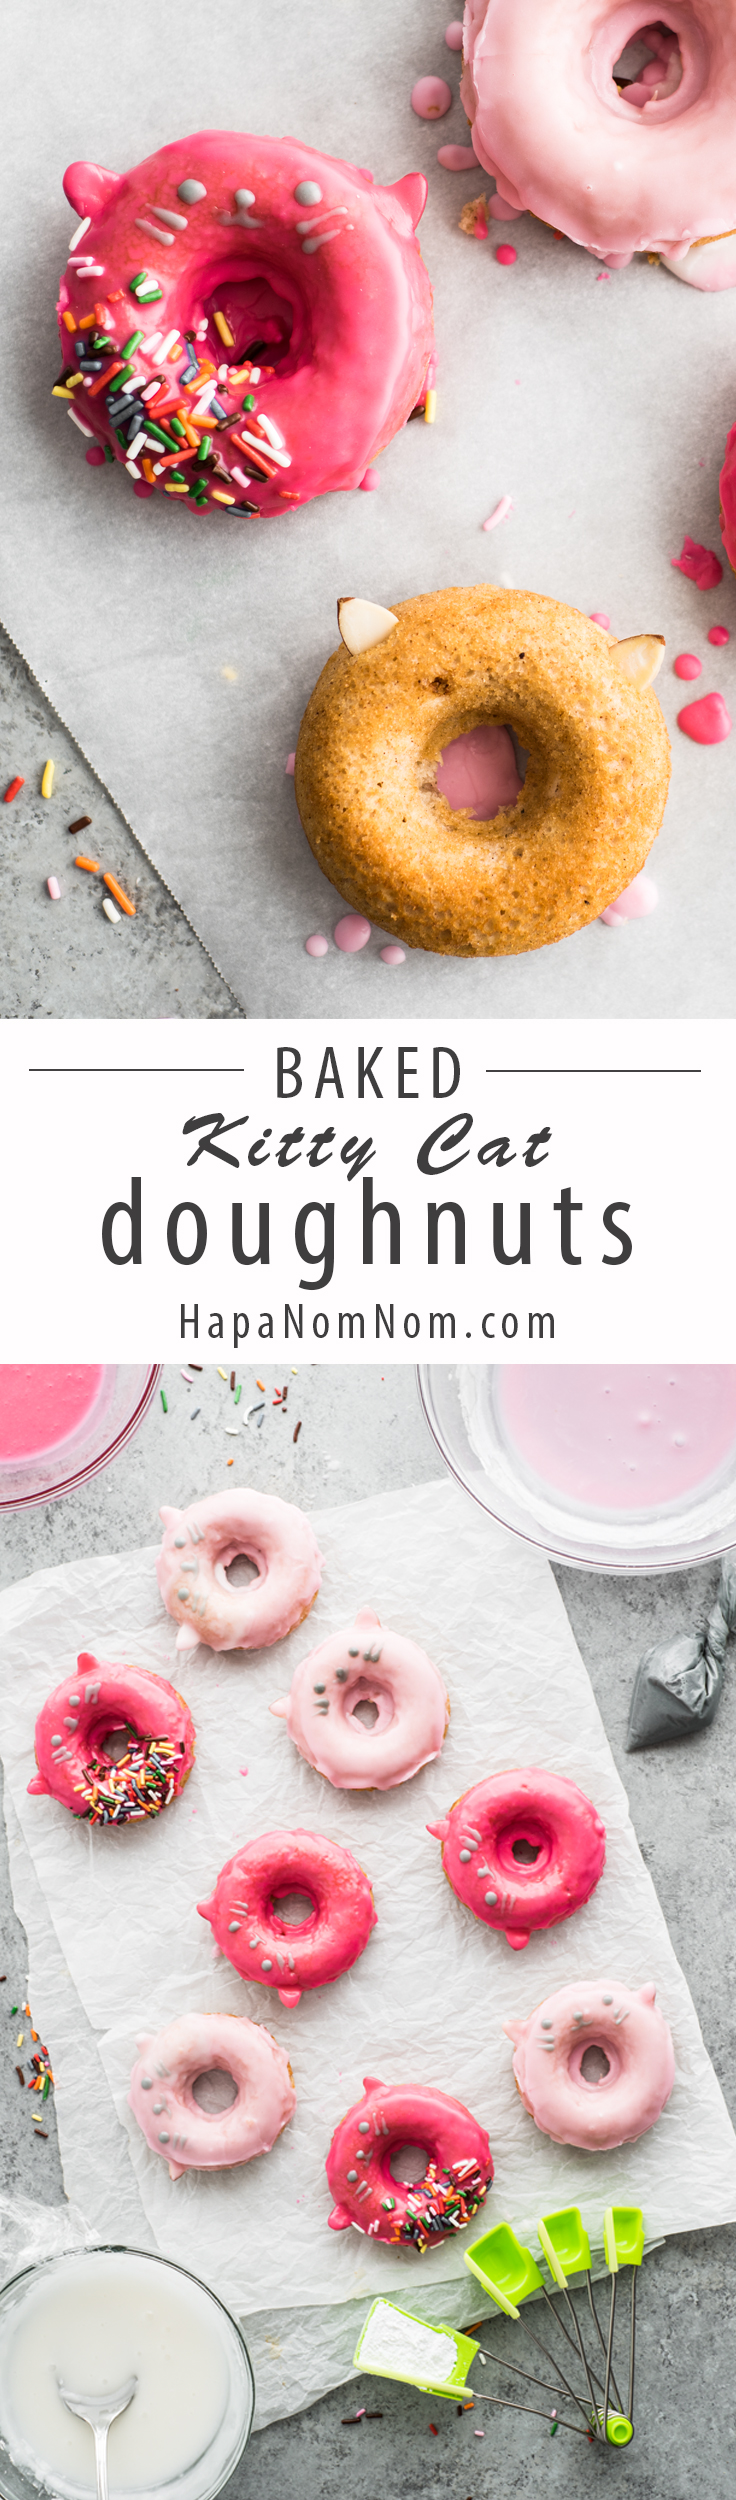 These baked kitty cat doughnuts are SO adorable, they're sure to bring a smile to anyone's face!